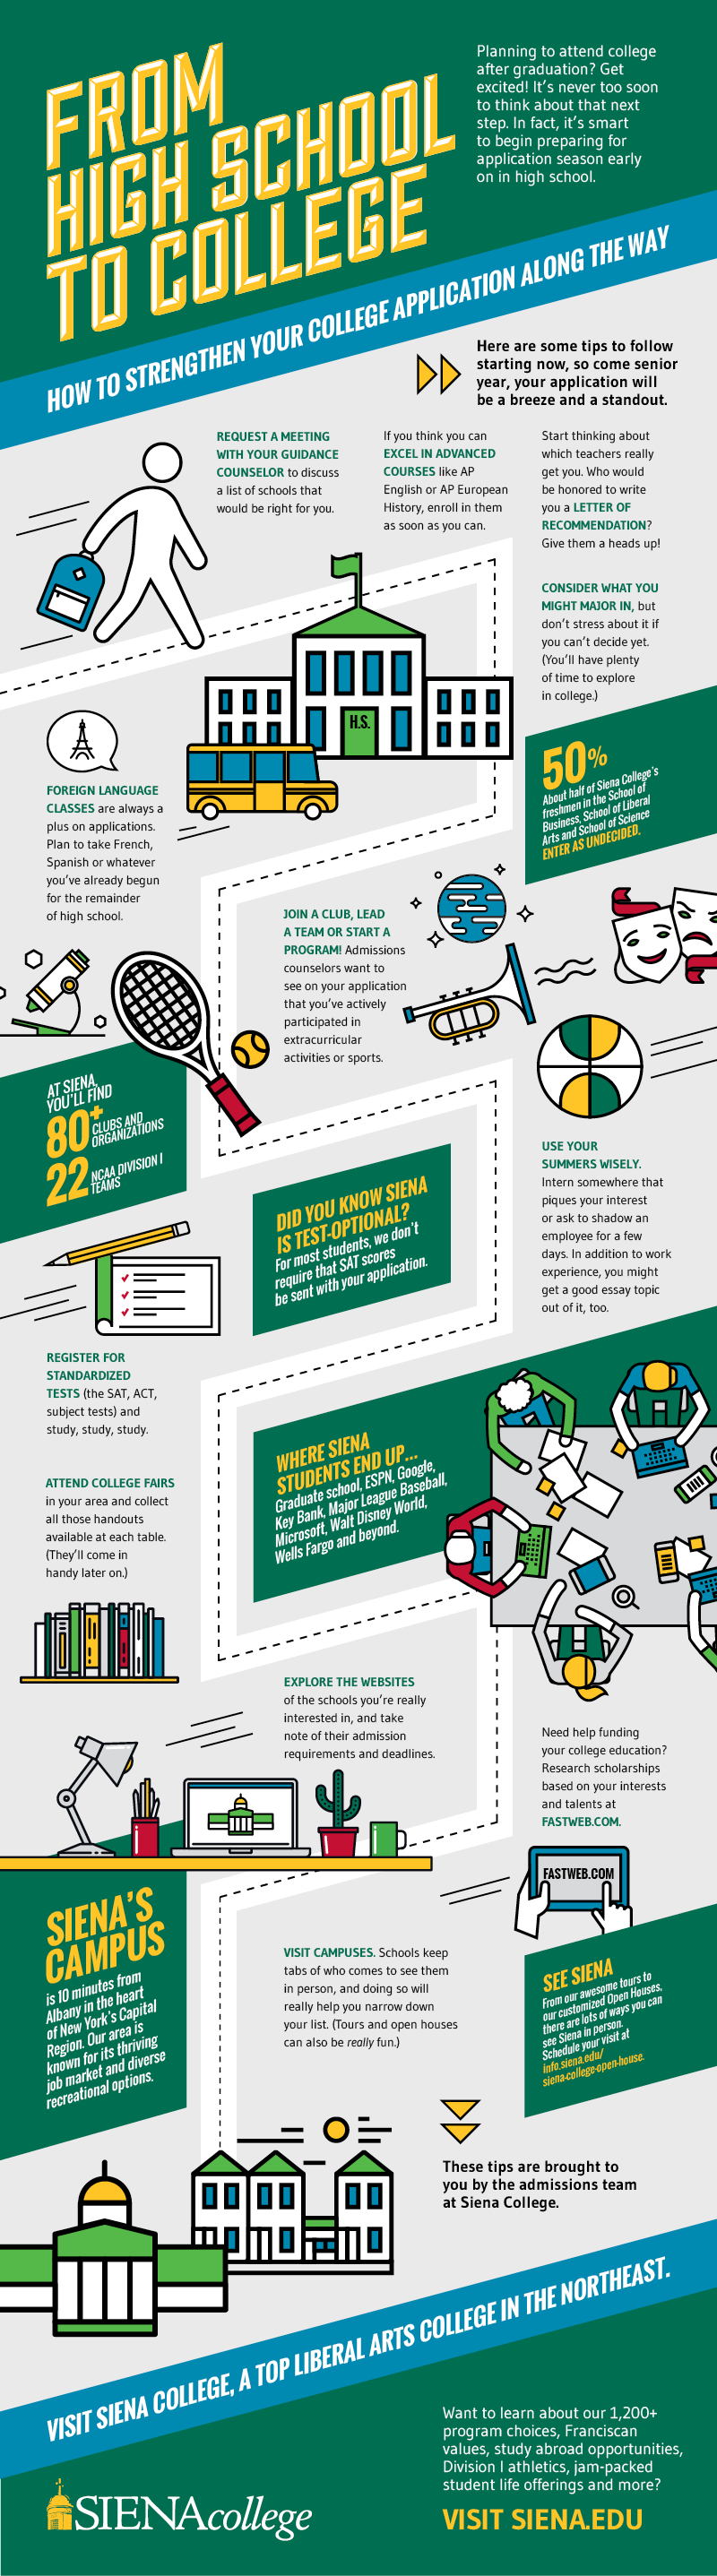 Getting From High School to College: An Infographic | Siena College